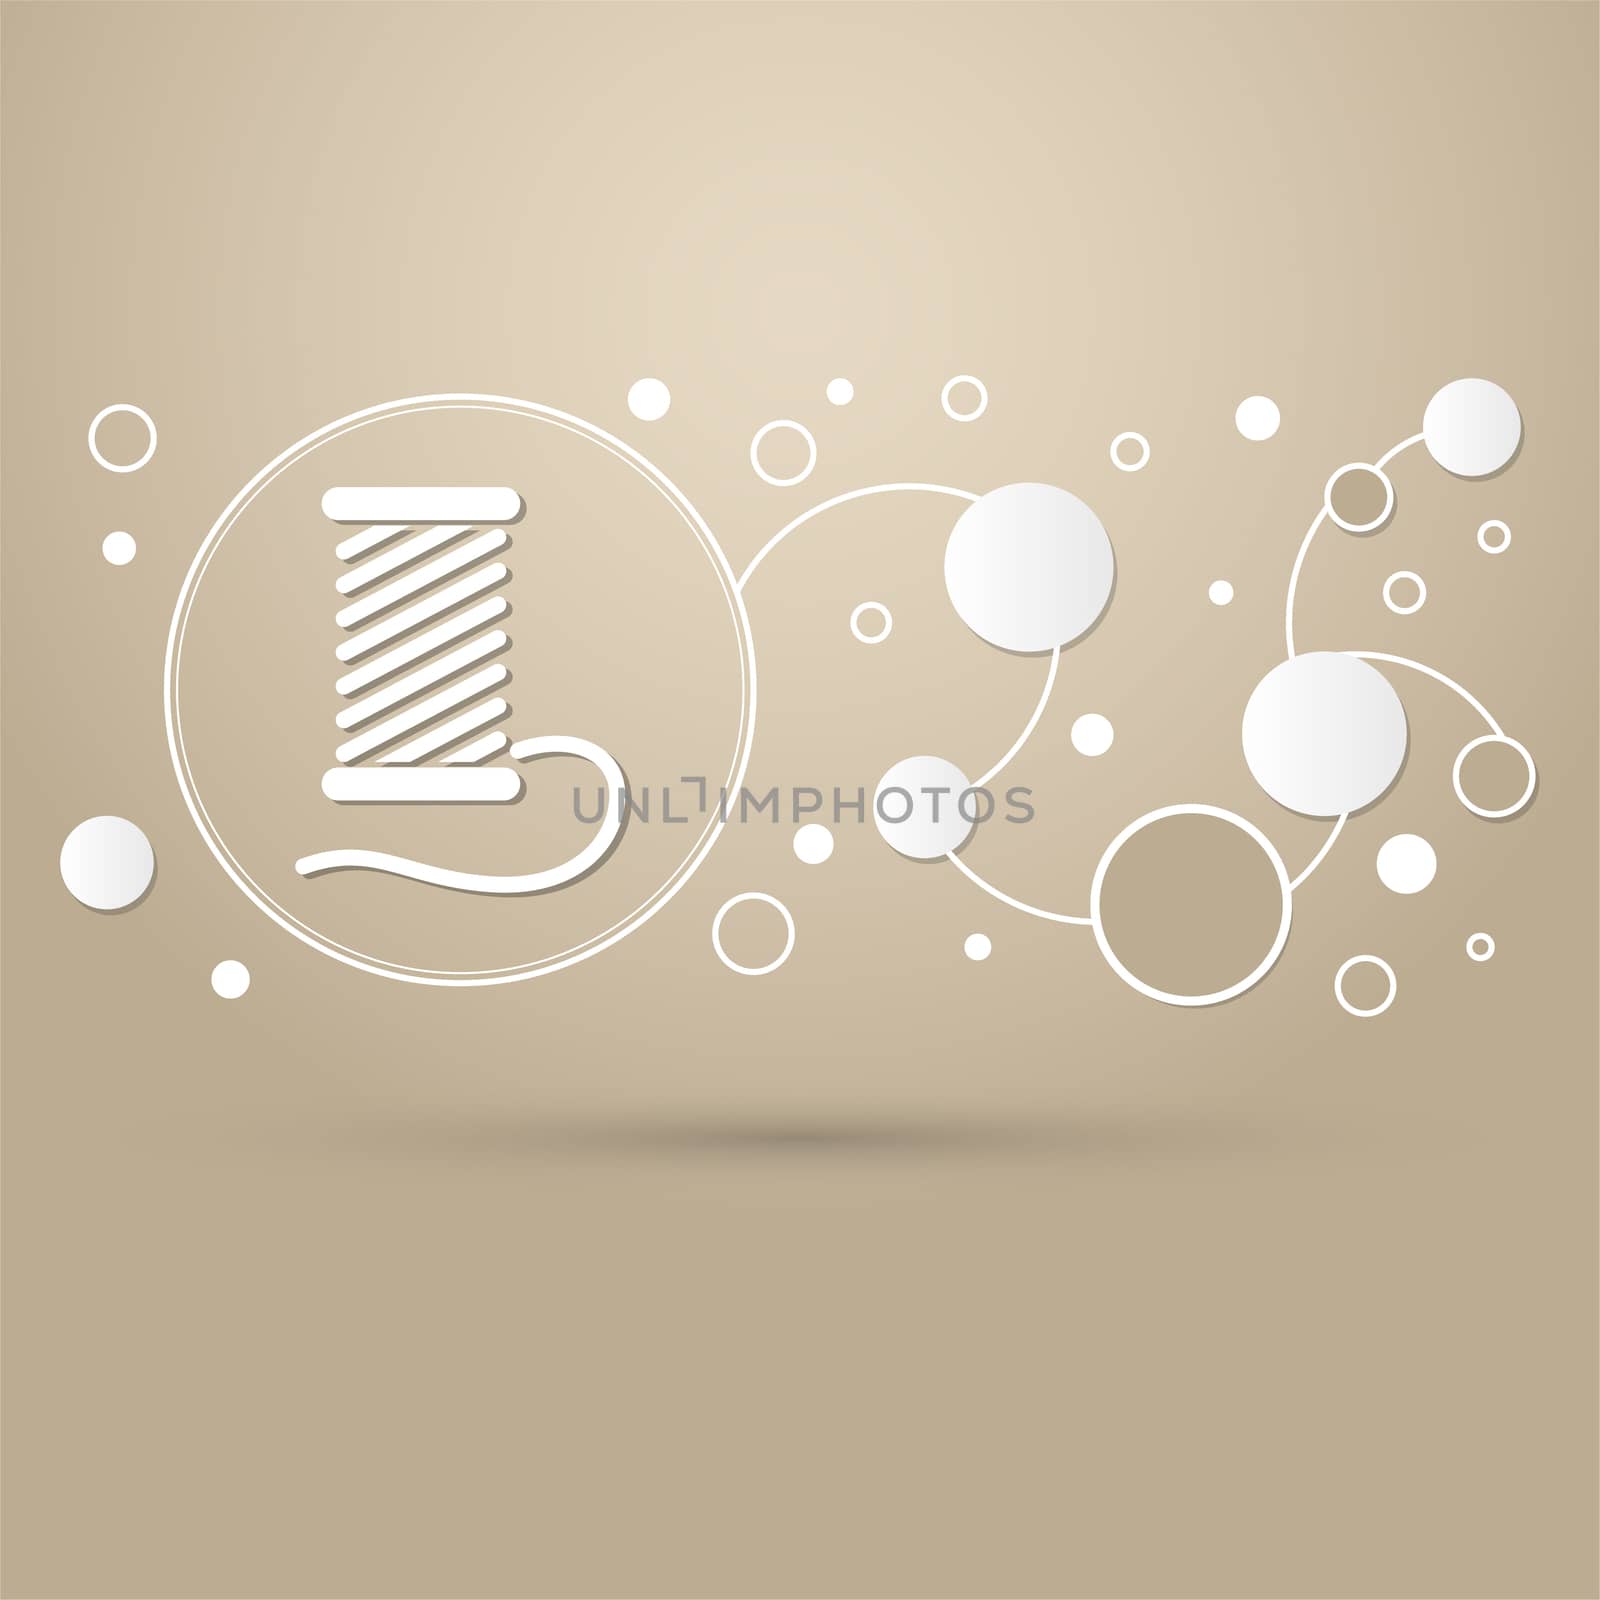 Thread Icon on a brown background with elegant style and modern design infographic.  by Adamchuk